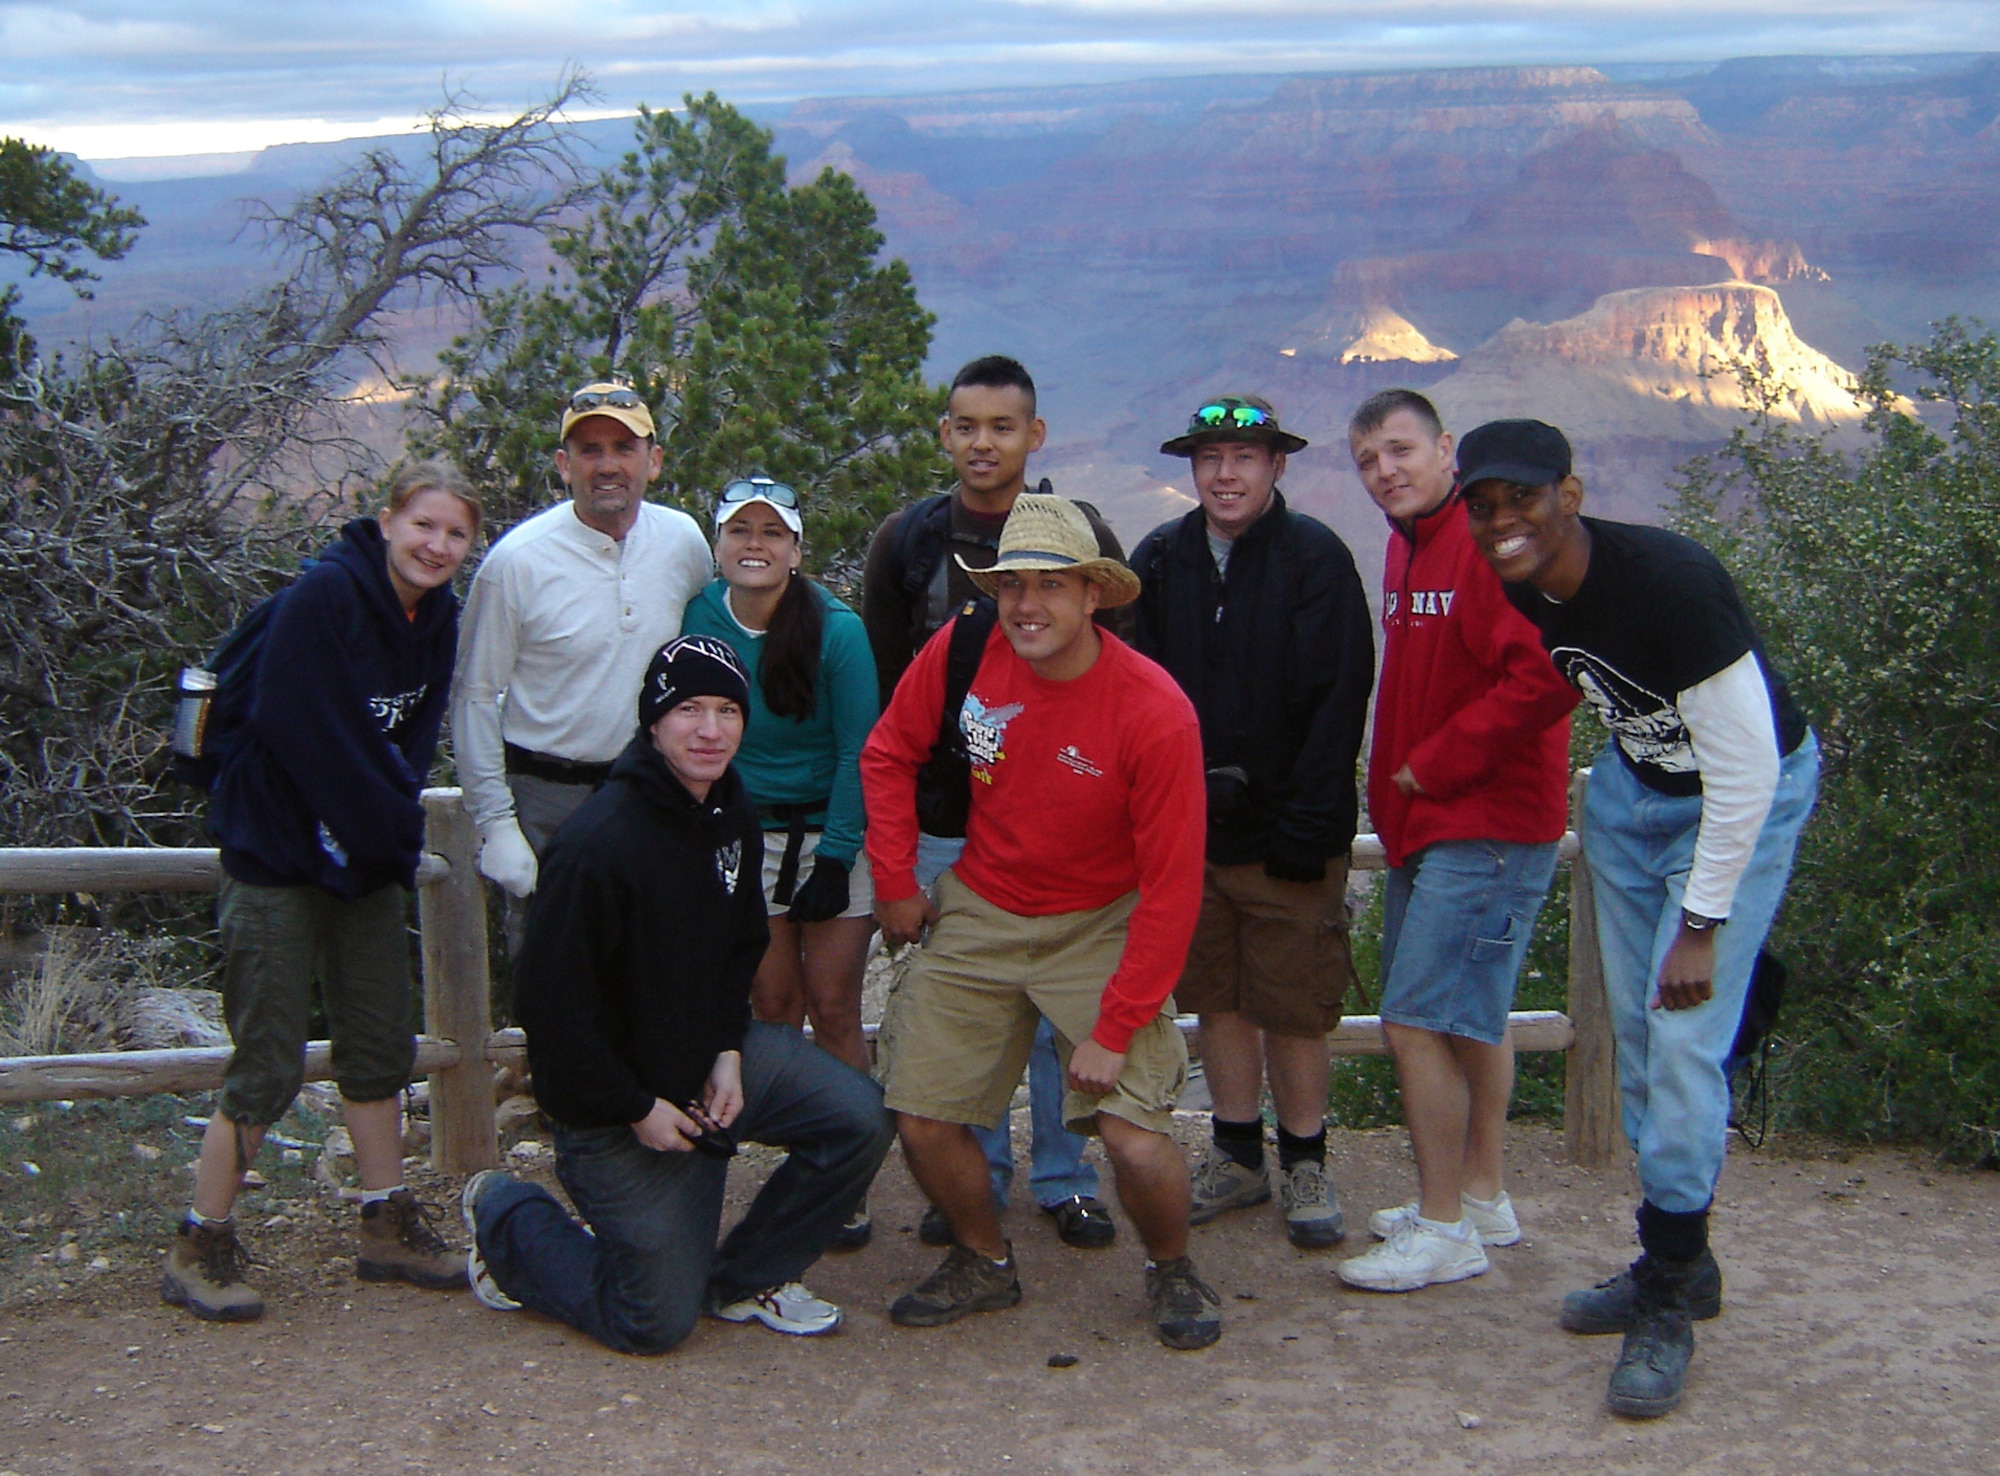 The daring and the able are about to embark on their 16-mile journey into the Grand Canyon. Airman 1st Class Oleksandra Manko with 99th ABW Public Affairs (far left) and Airman 1st Class Jon Ledbetter with 57th Weapon’s Support School (far right) held up Nellis’ reputation on the hike. (Courtesy photo)

